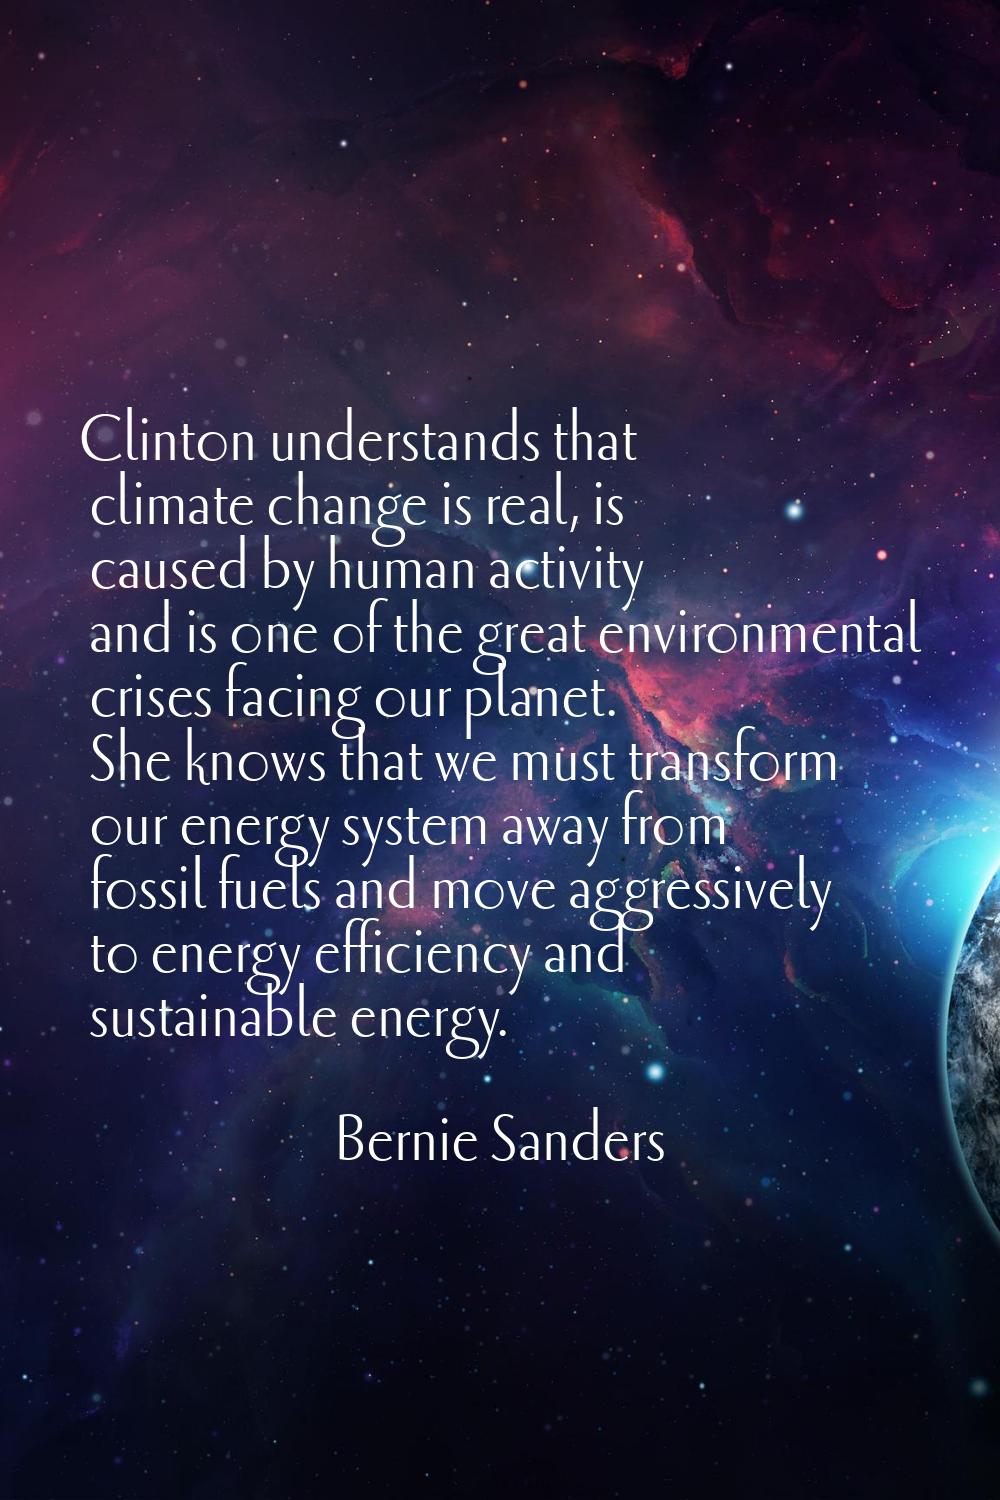 Clinton understands that climate change is real, is caused by human activity and is one of the grea